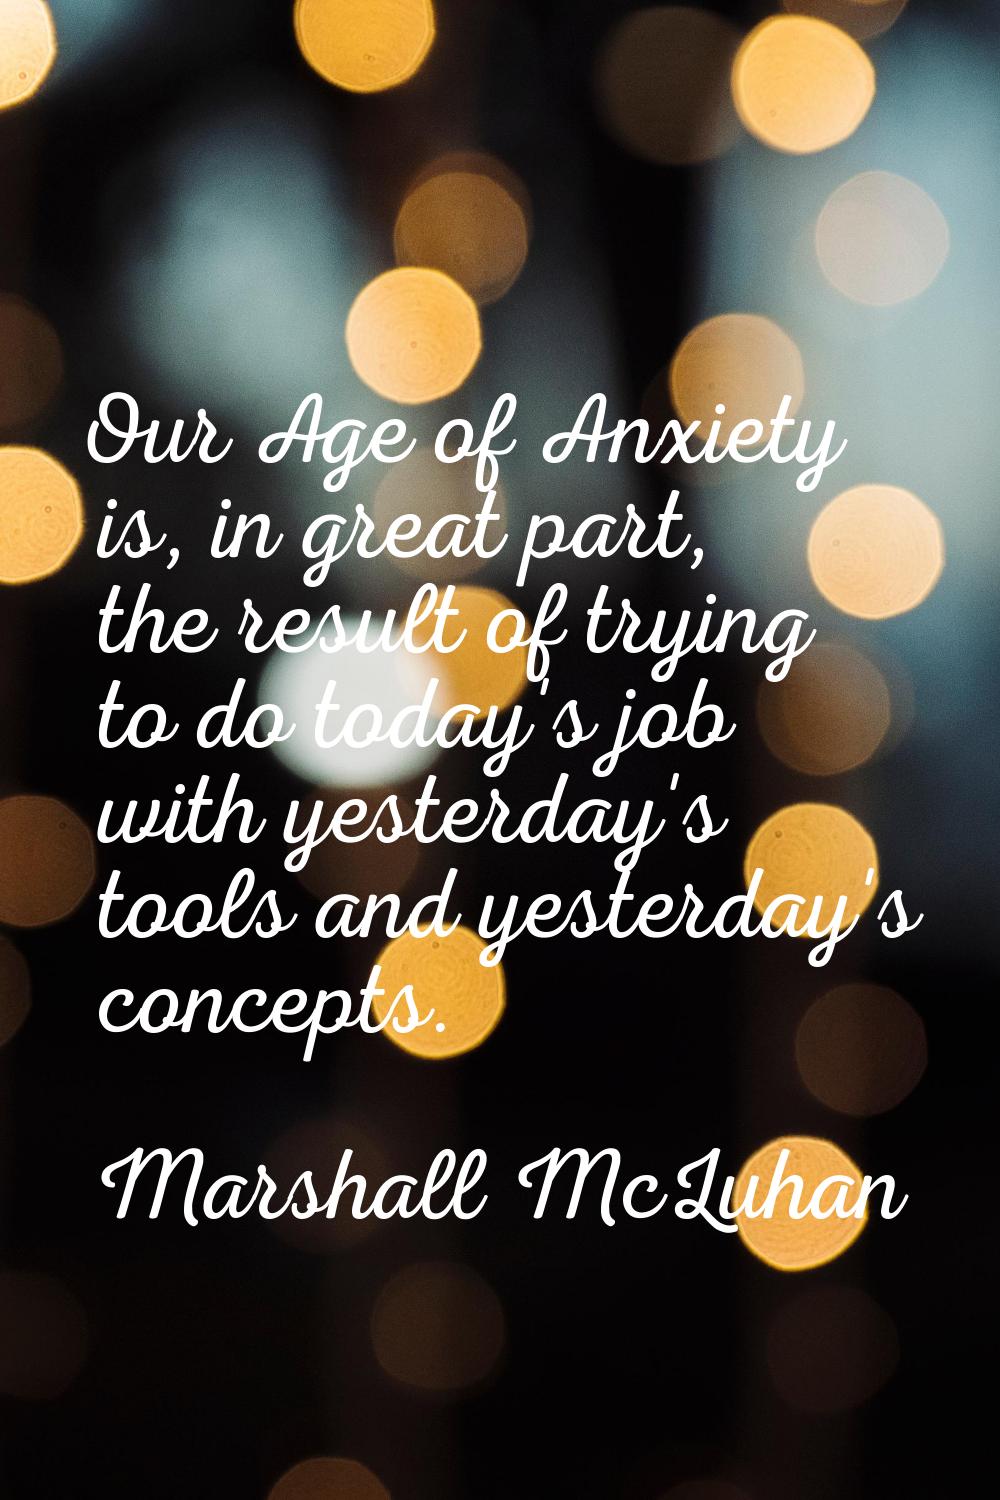 Our Age of Anxiety is, in great part, the result of trying to do today's job with yesterday's tools